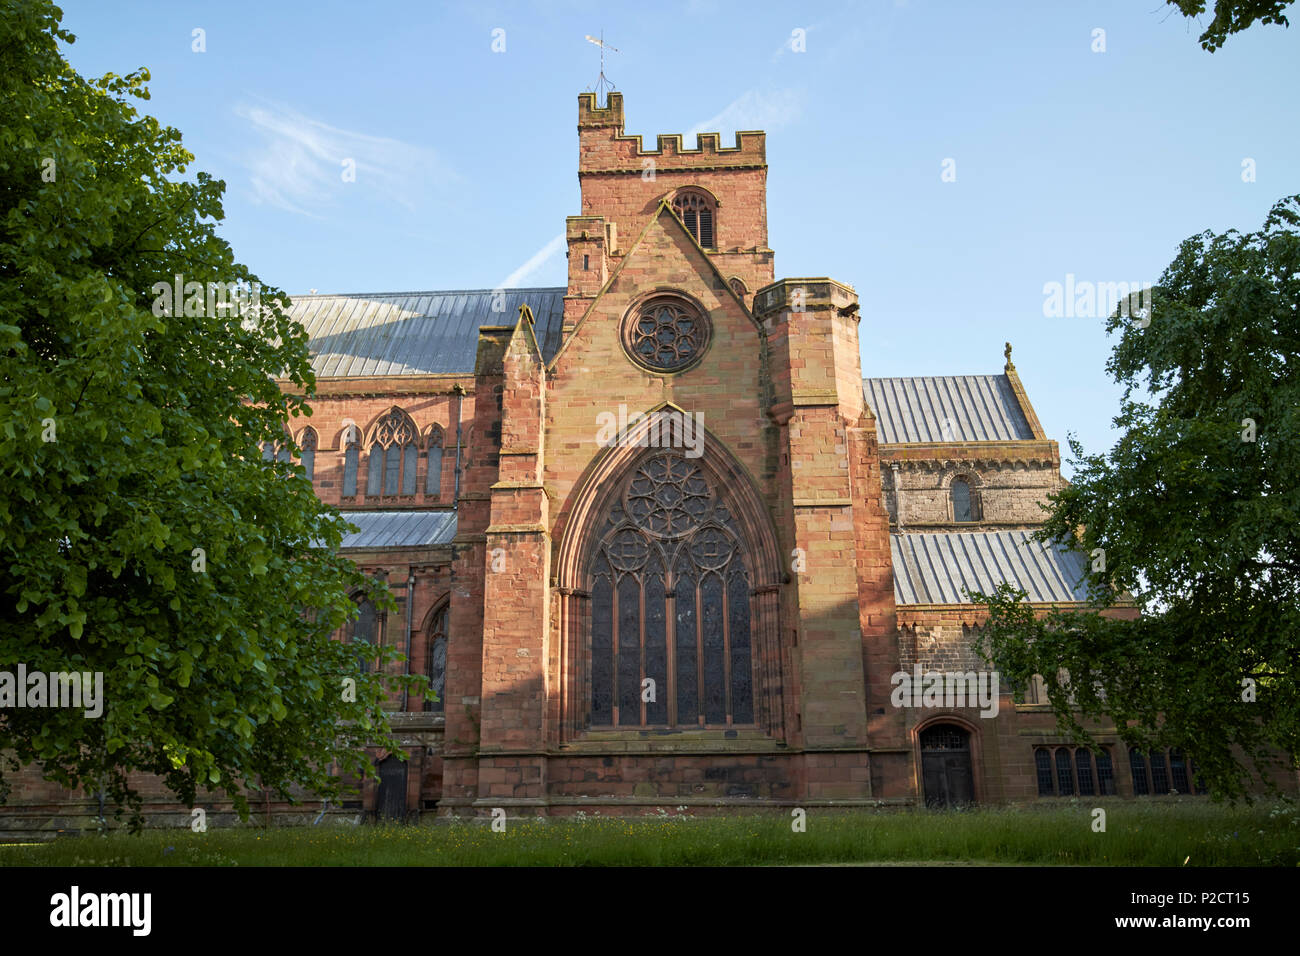 east side of the cathedral church of the holy and undivided trinity carlisle cathedral Carlisle Cumbria England UK Stock Photo